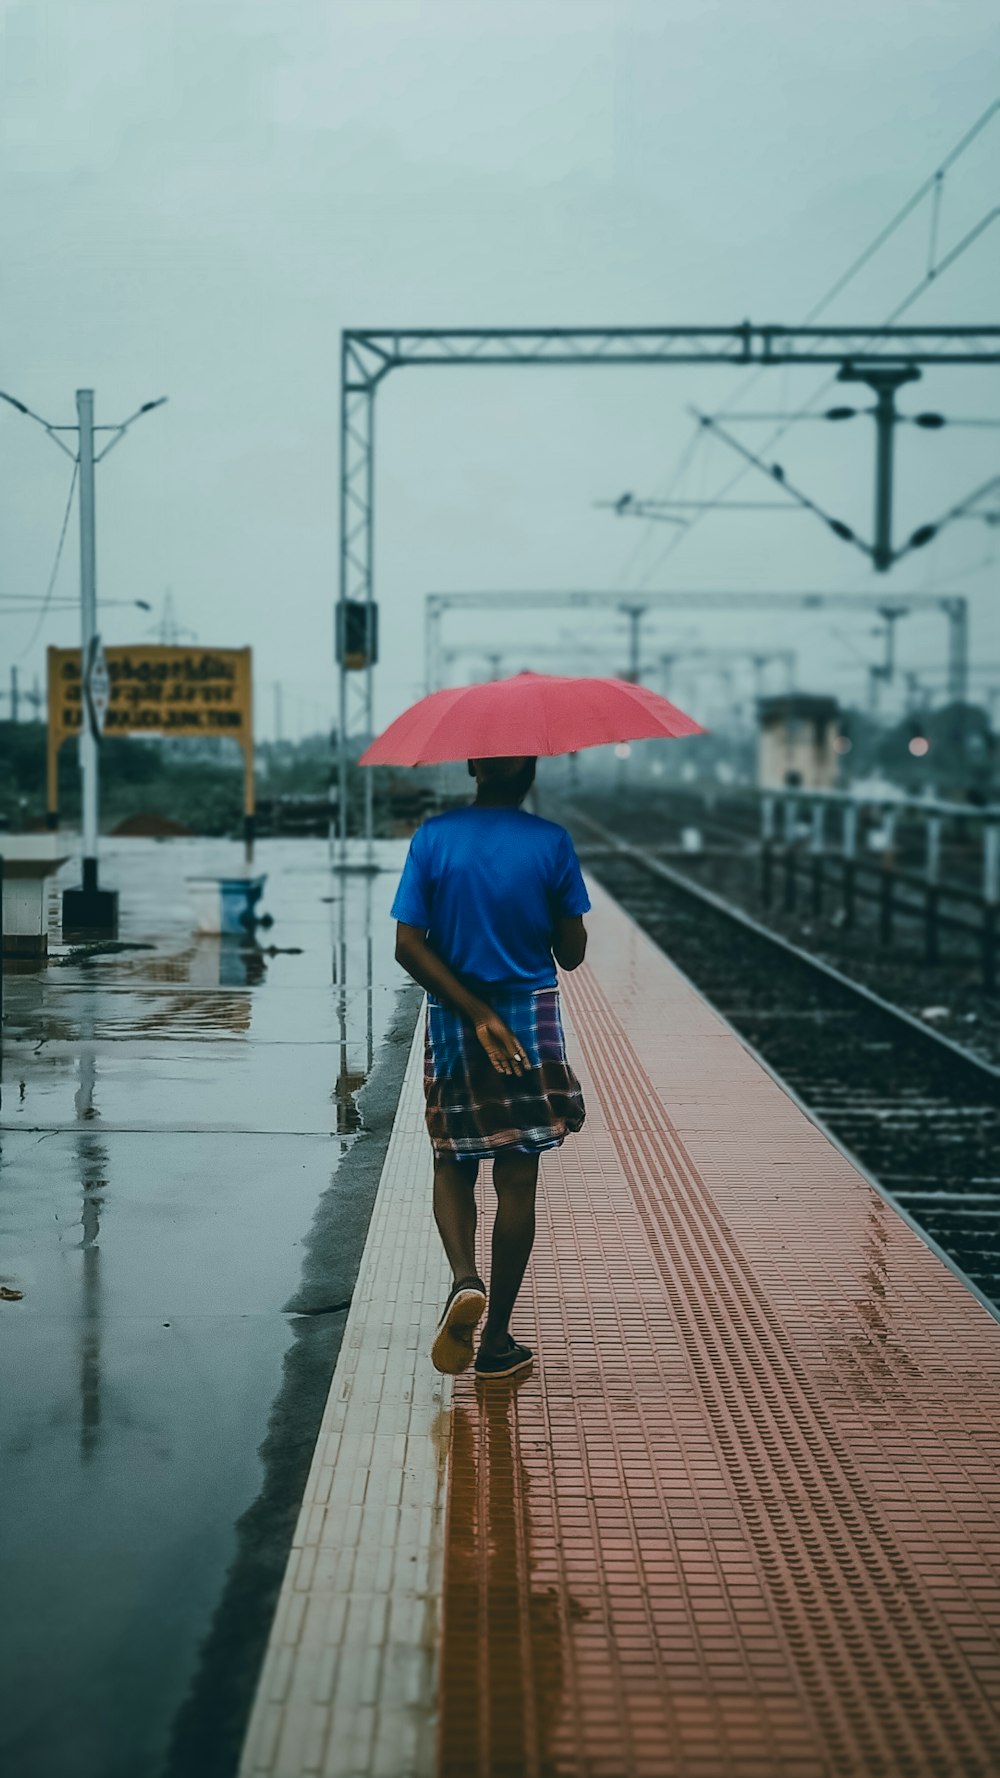 a man walking down a train track with a red umbrella